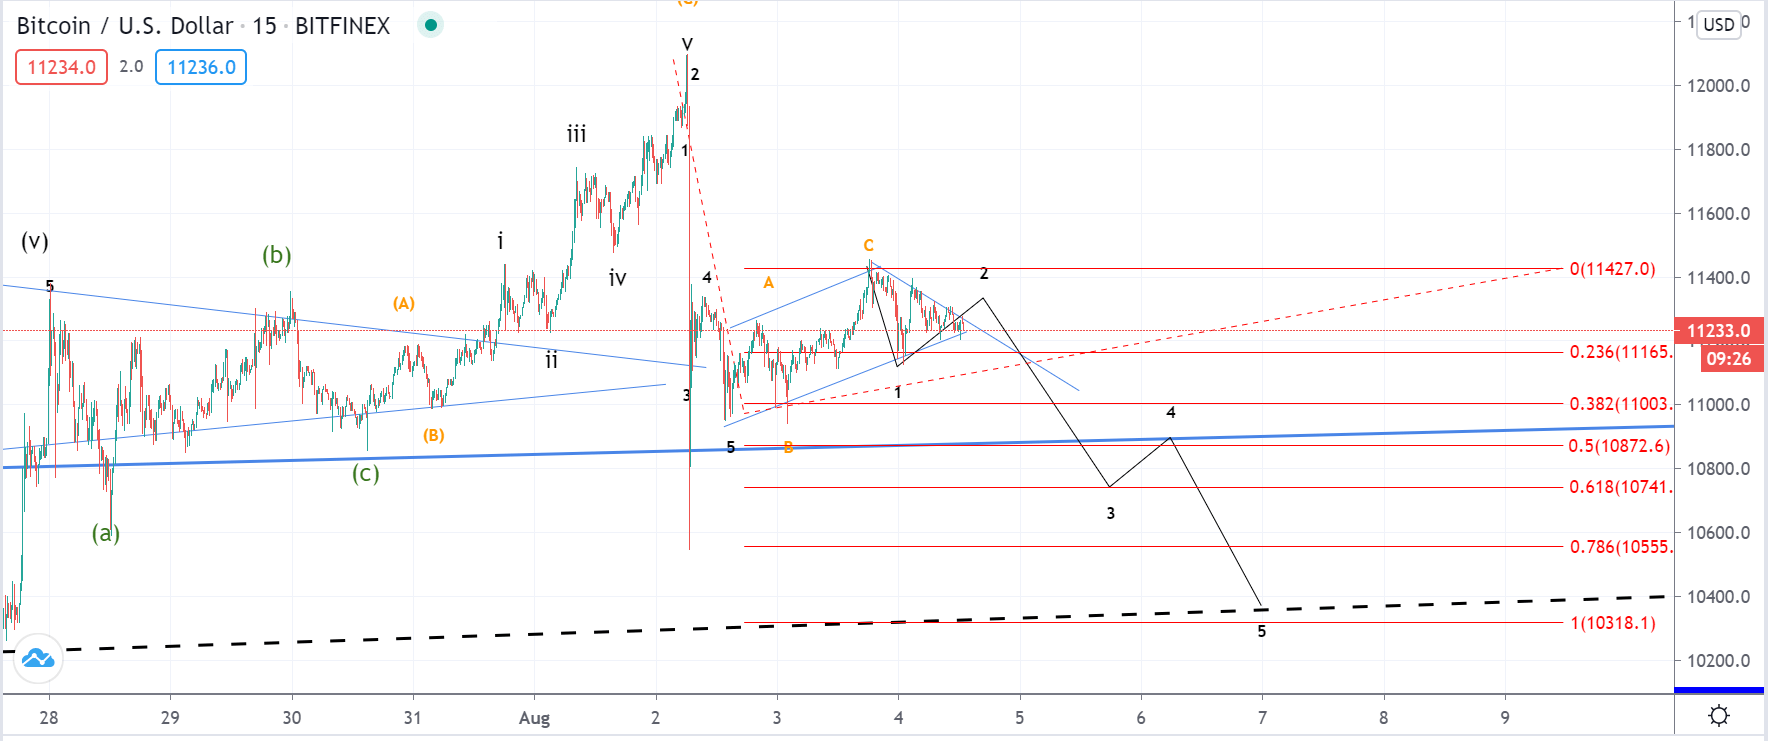 BTC and XRP - Downtrend indicated